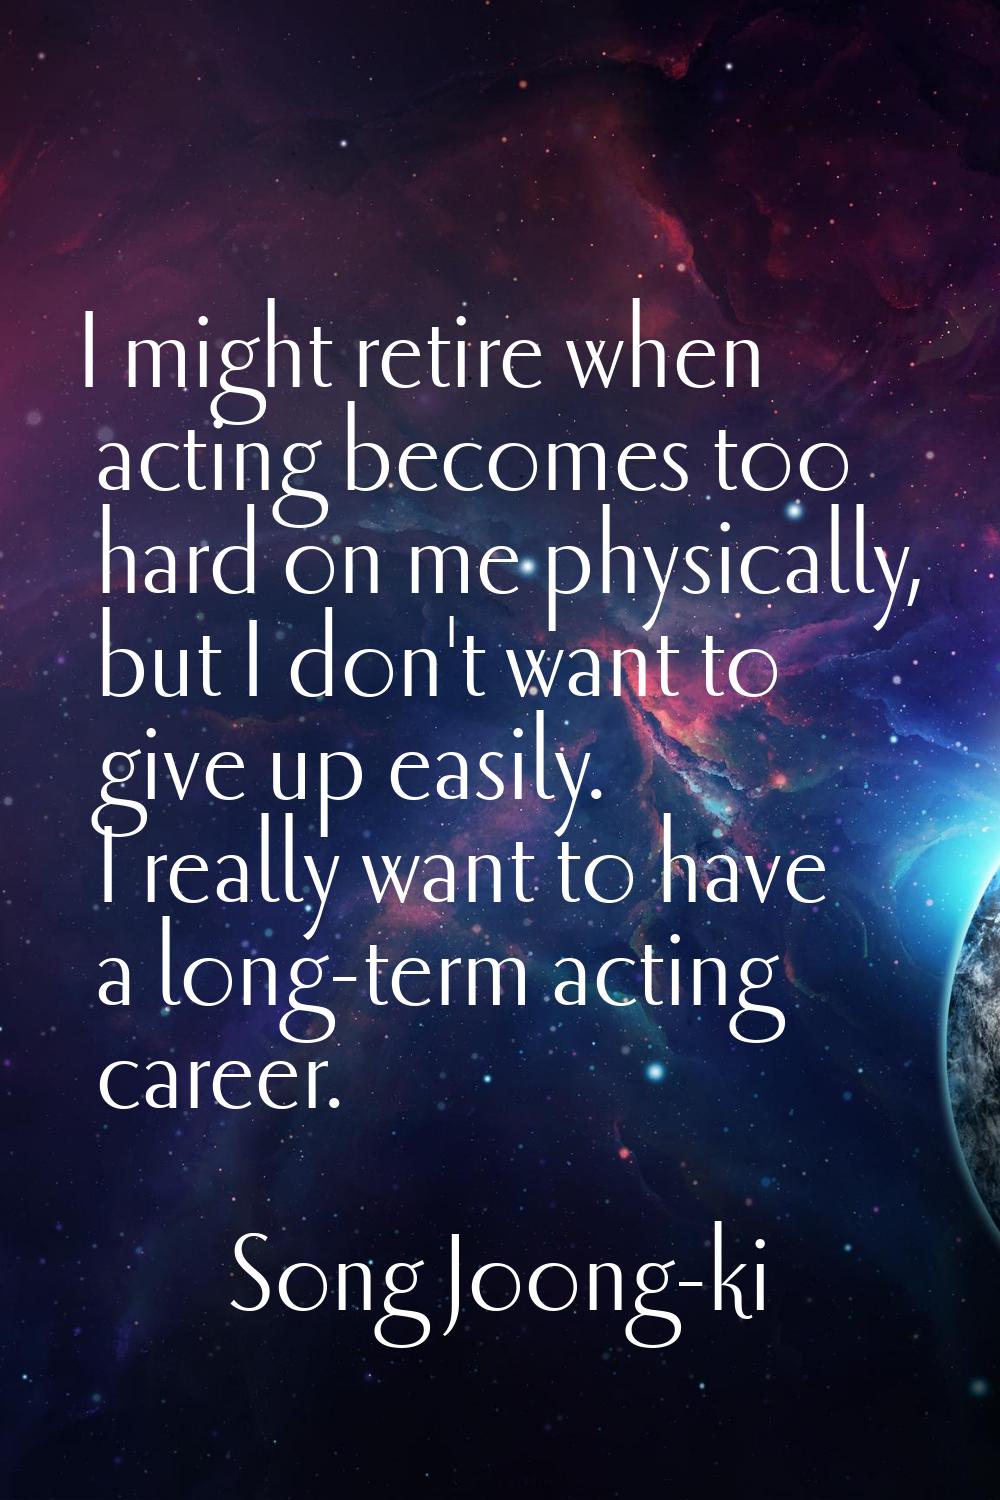 I might retire when acting becomes too hard on me physically, but I don't want to give up easily. I